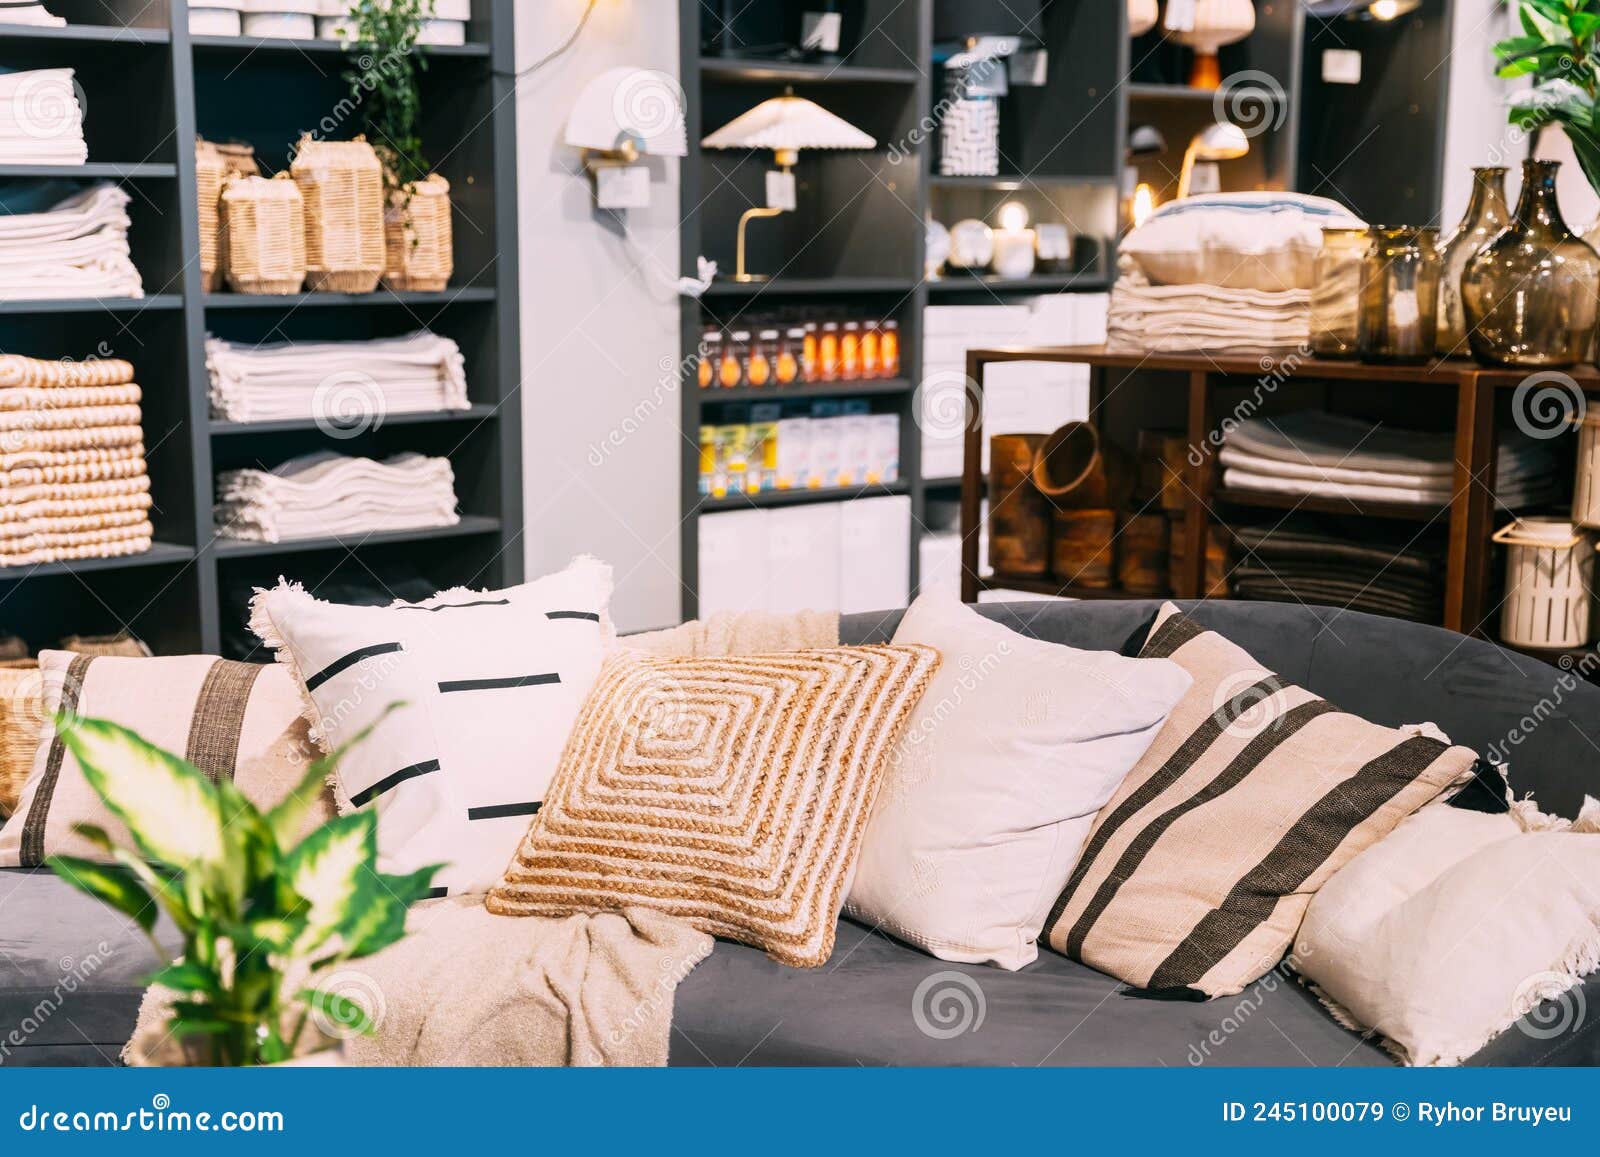 https://thumbs.dreamstime.com/z/home-accessories-household-products-store-shopping-centre-view-living-room-shop-fashion-retail-sofa-pillows-245100079.jpg